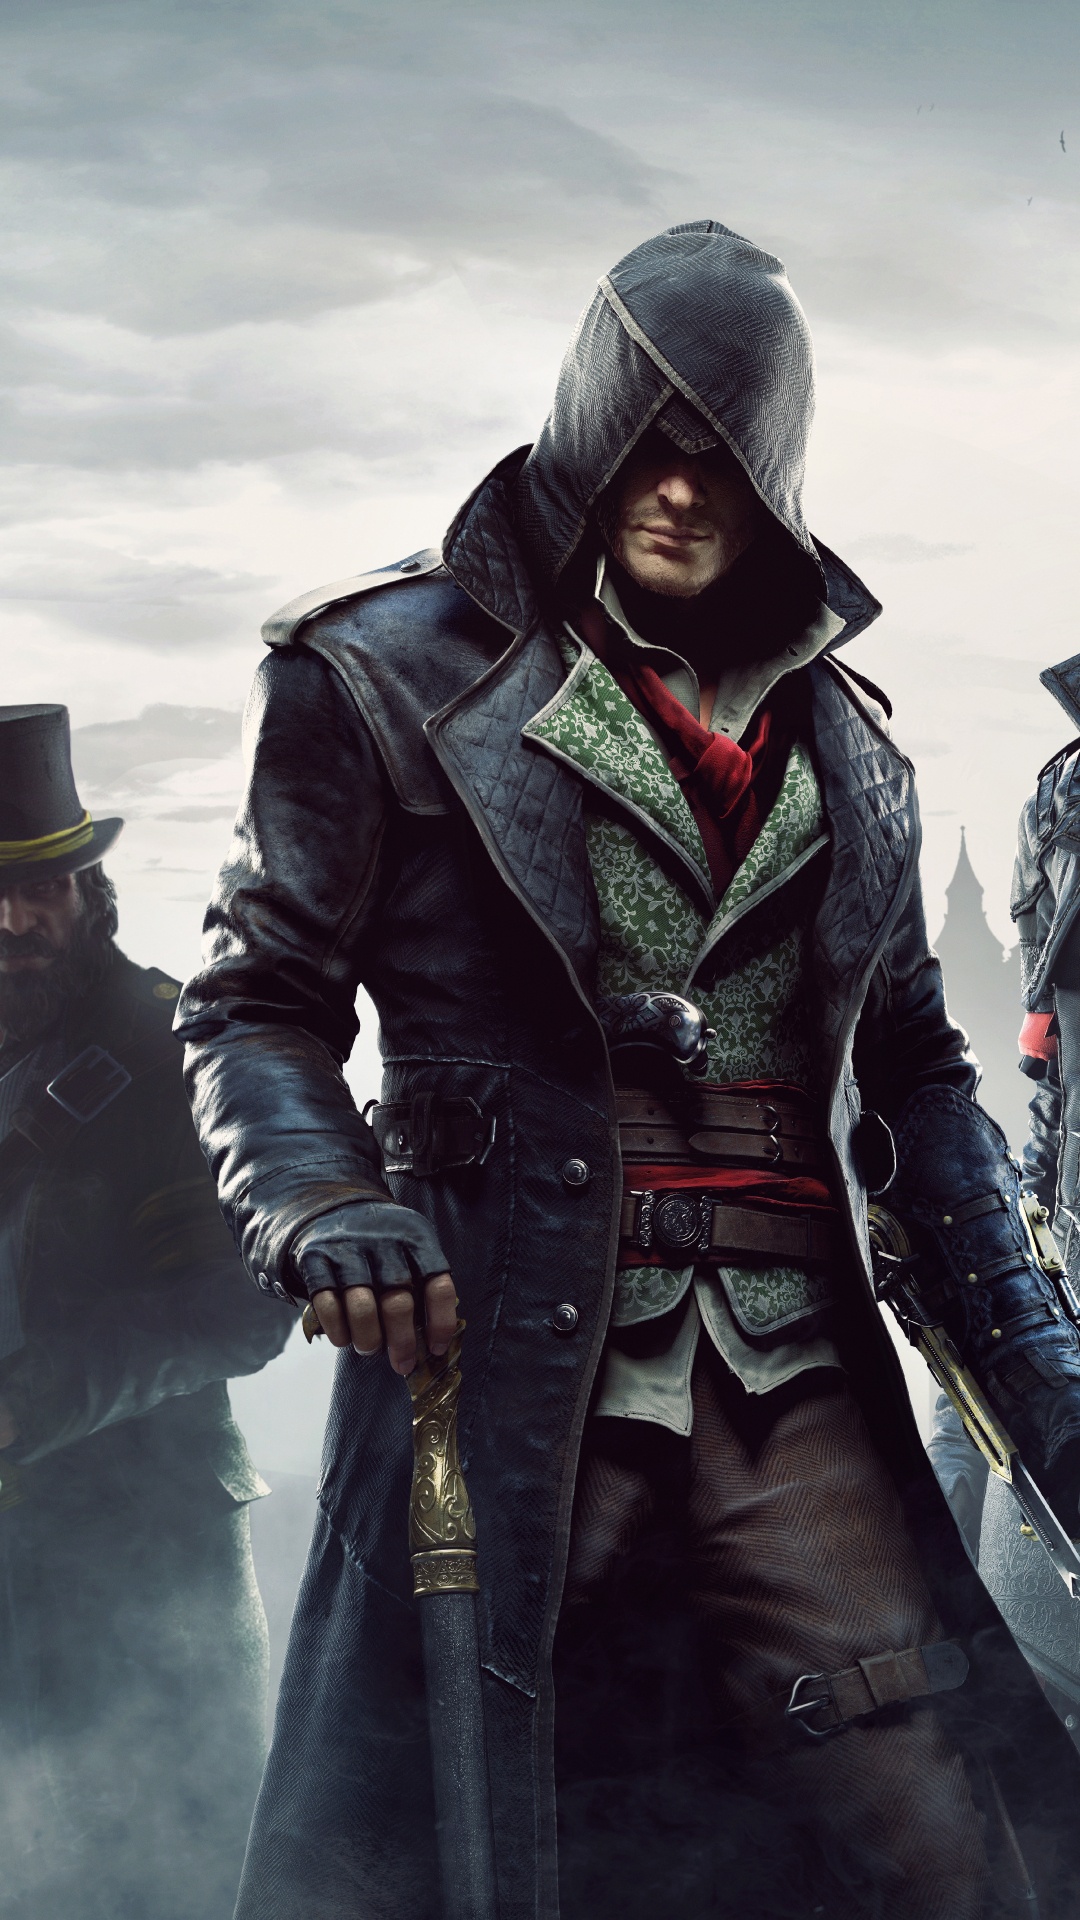 Assassins Creed Syndicate, Ubisoft, pc Game, Film, Assassins Creed Unity. Wallpaper in 1080x1920 Resolution